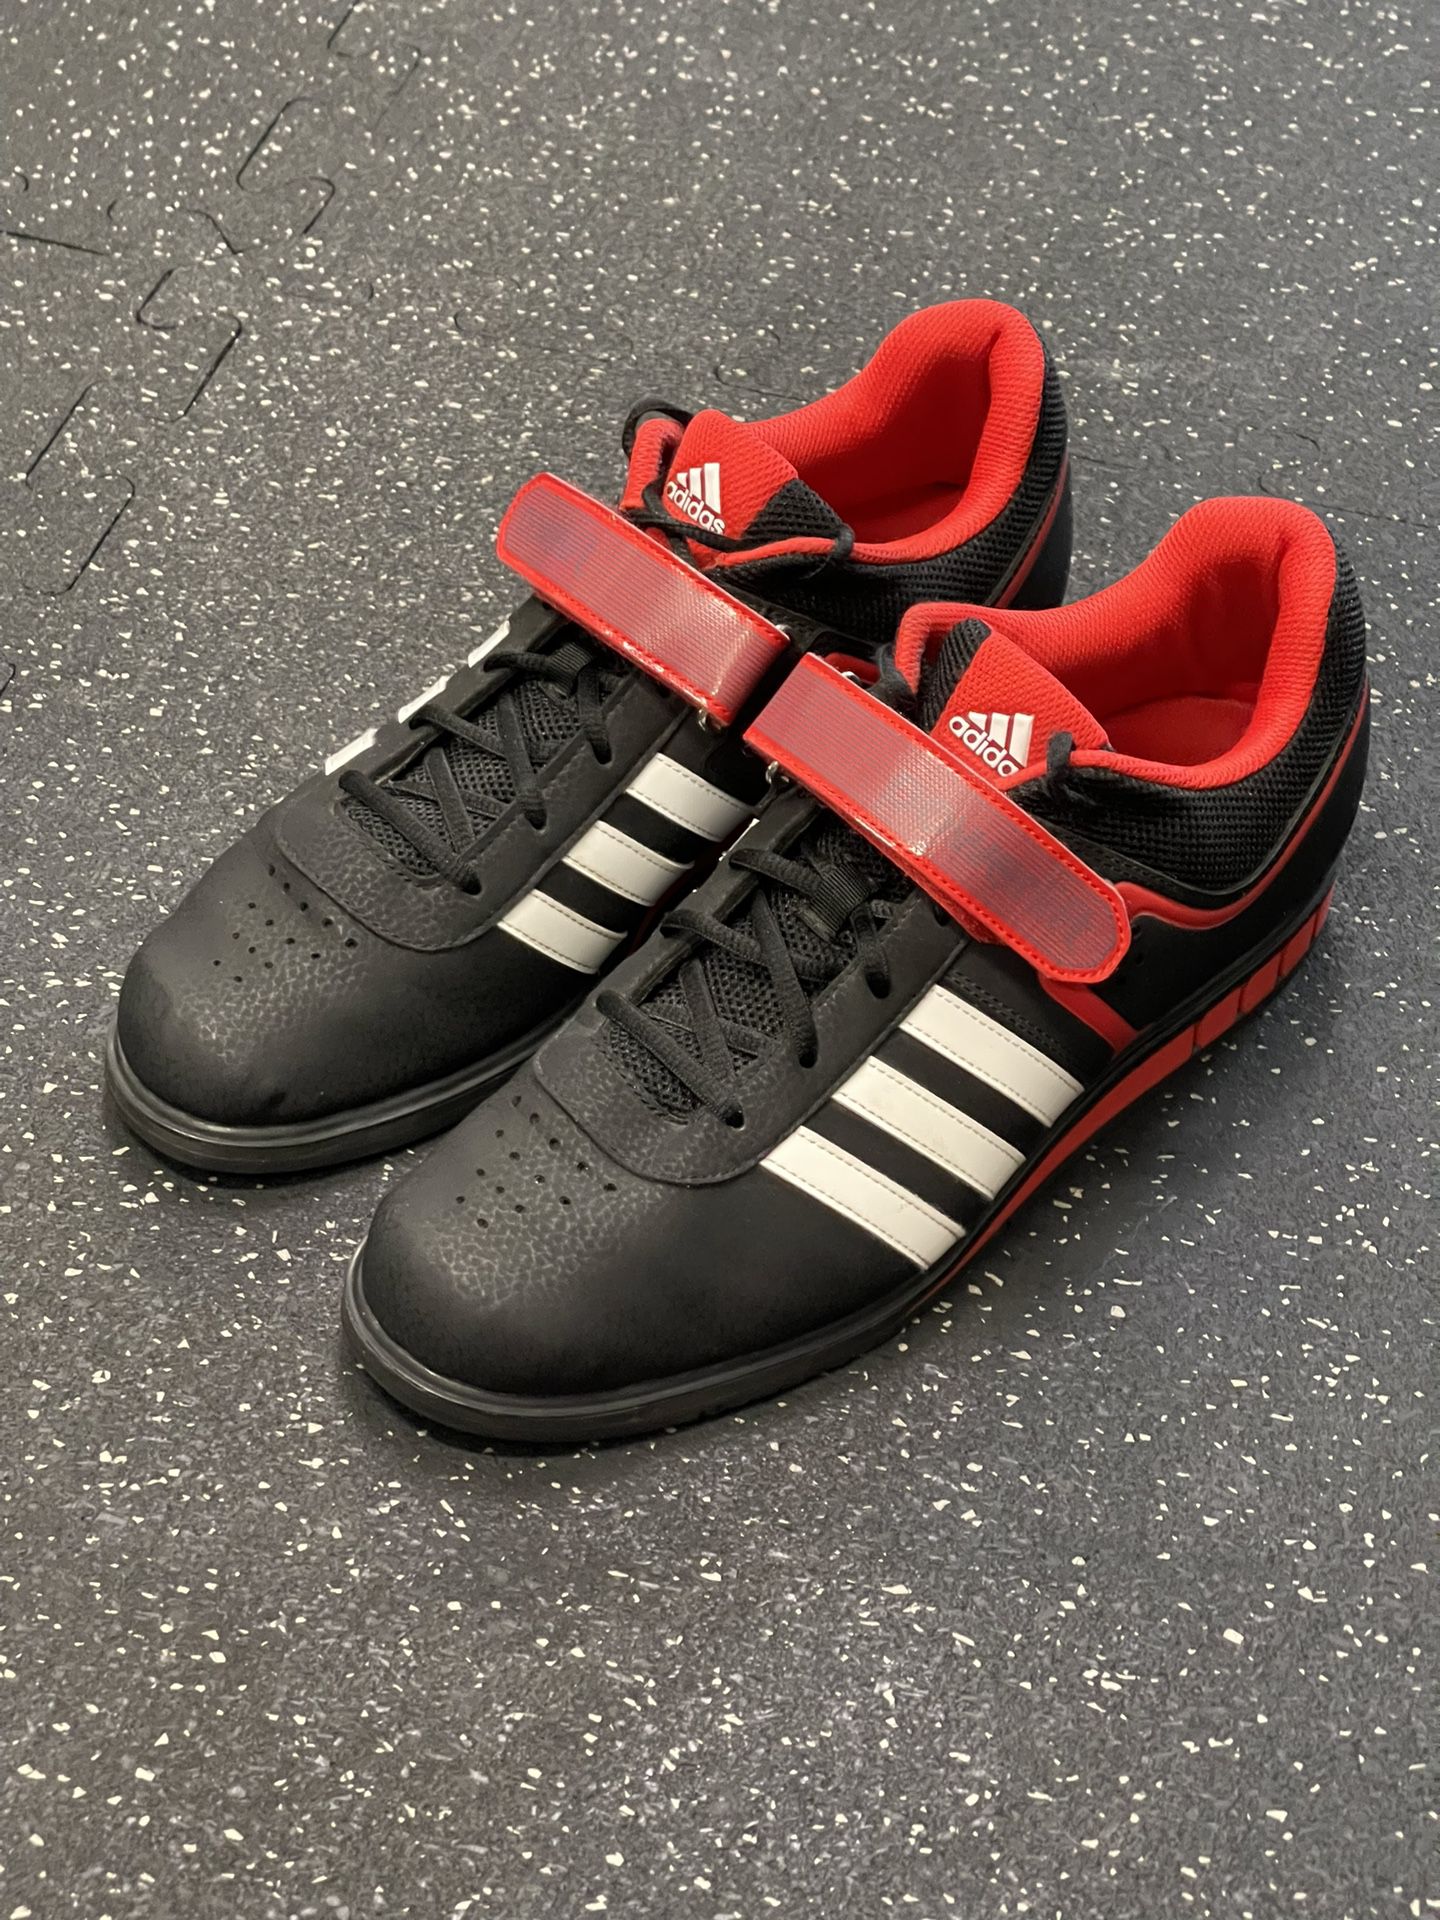 Línea del sitio tuberculosis Preescolar Adidas Powerlift 2 Athletic Weightlifting Shoes Black Red for Sale in Mesa,  AZ - OfferUp